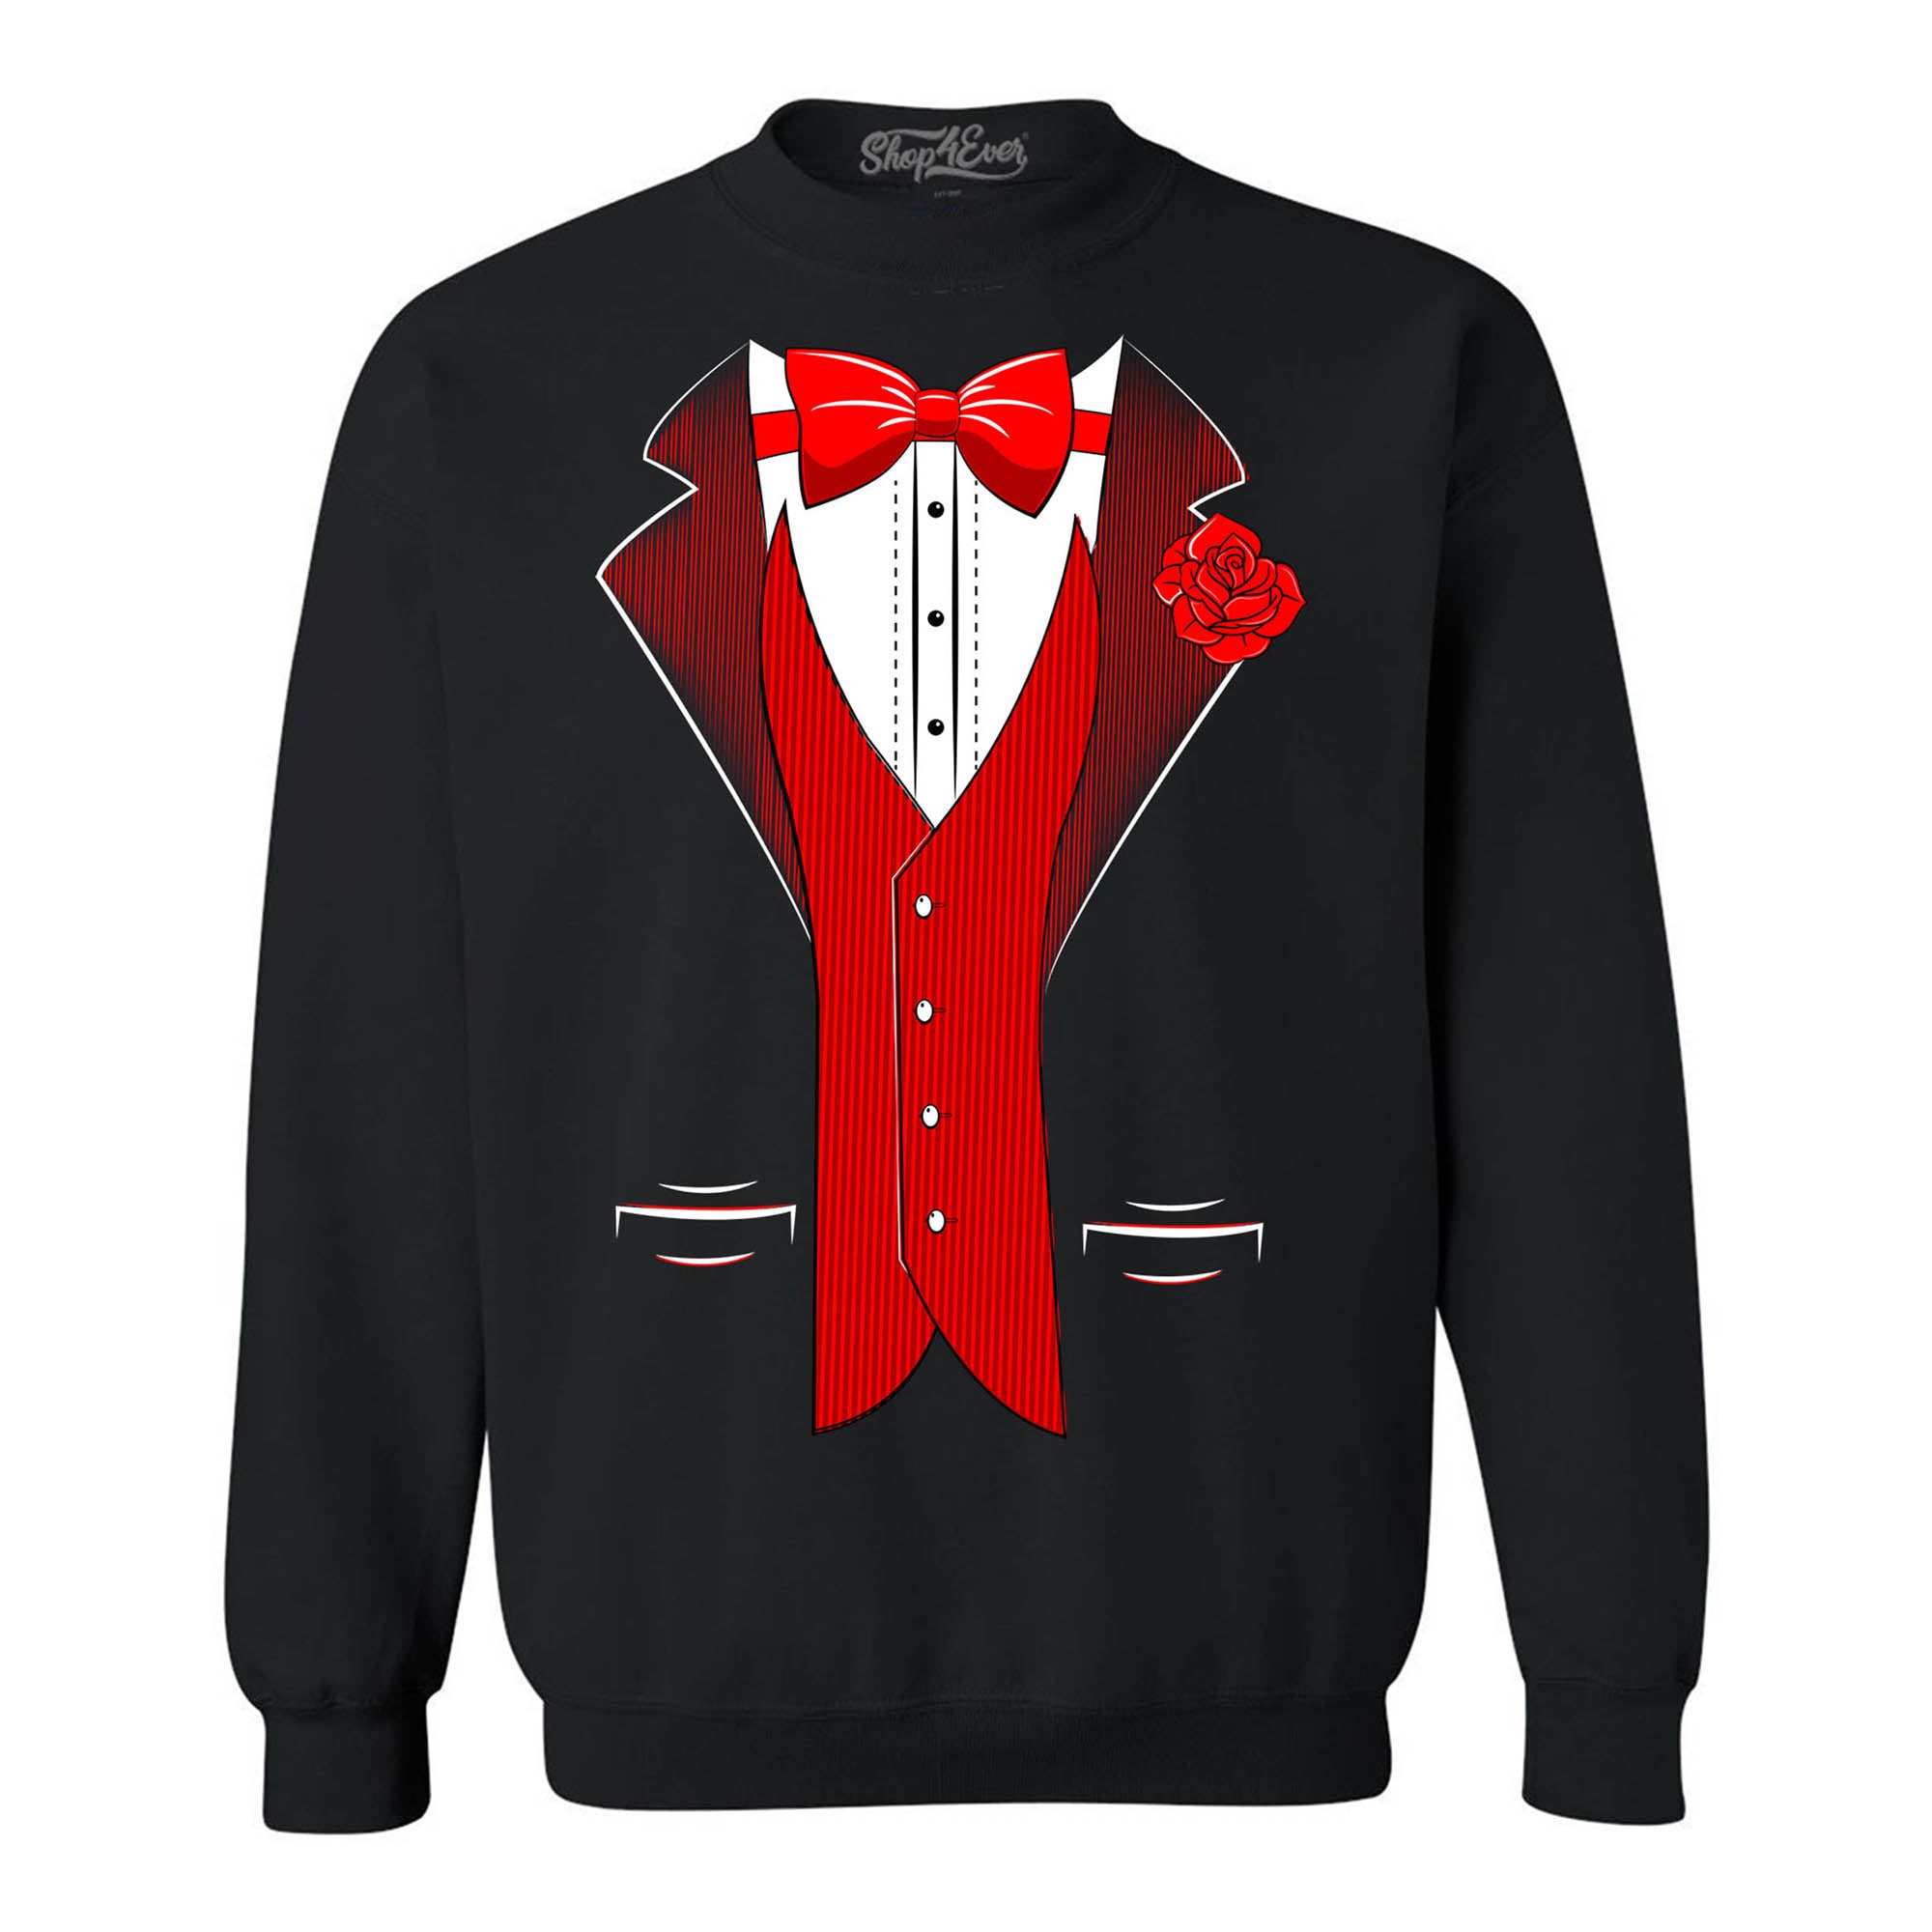 Classic Tuxedo with Red Rose Funny Party Costume Crewneck Sweatshirts